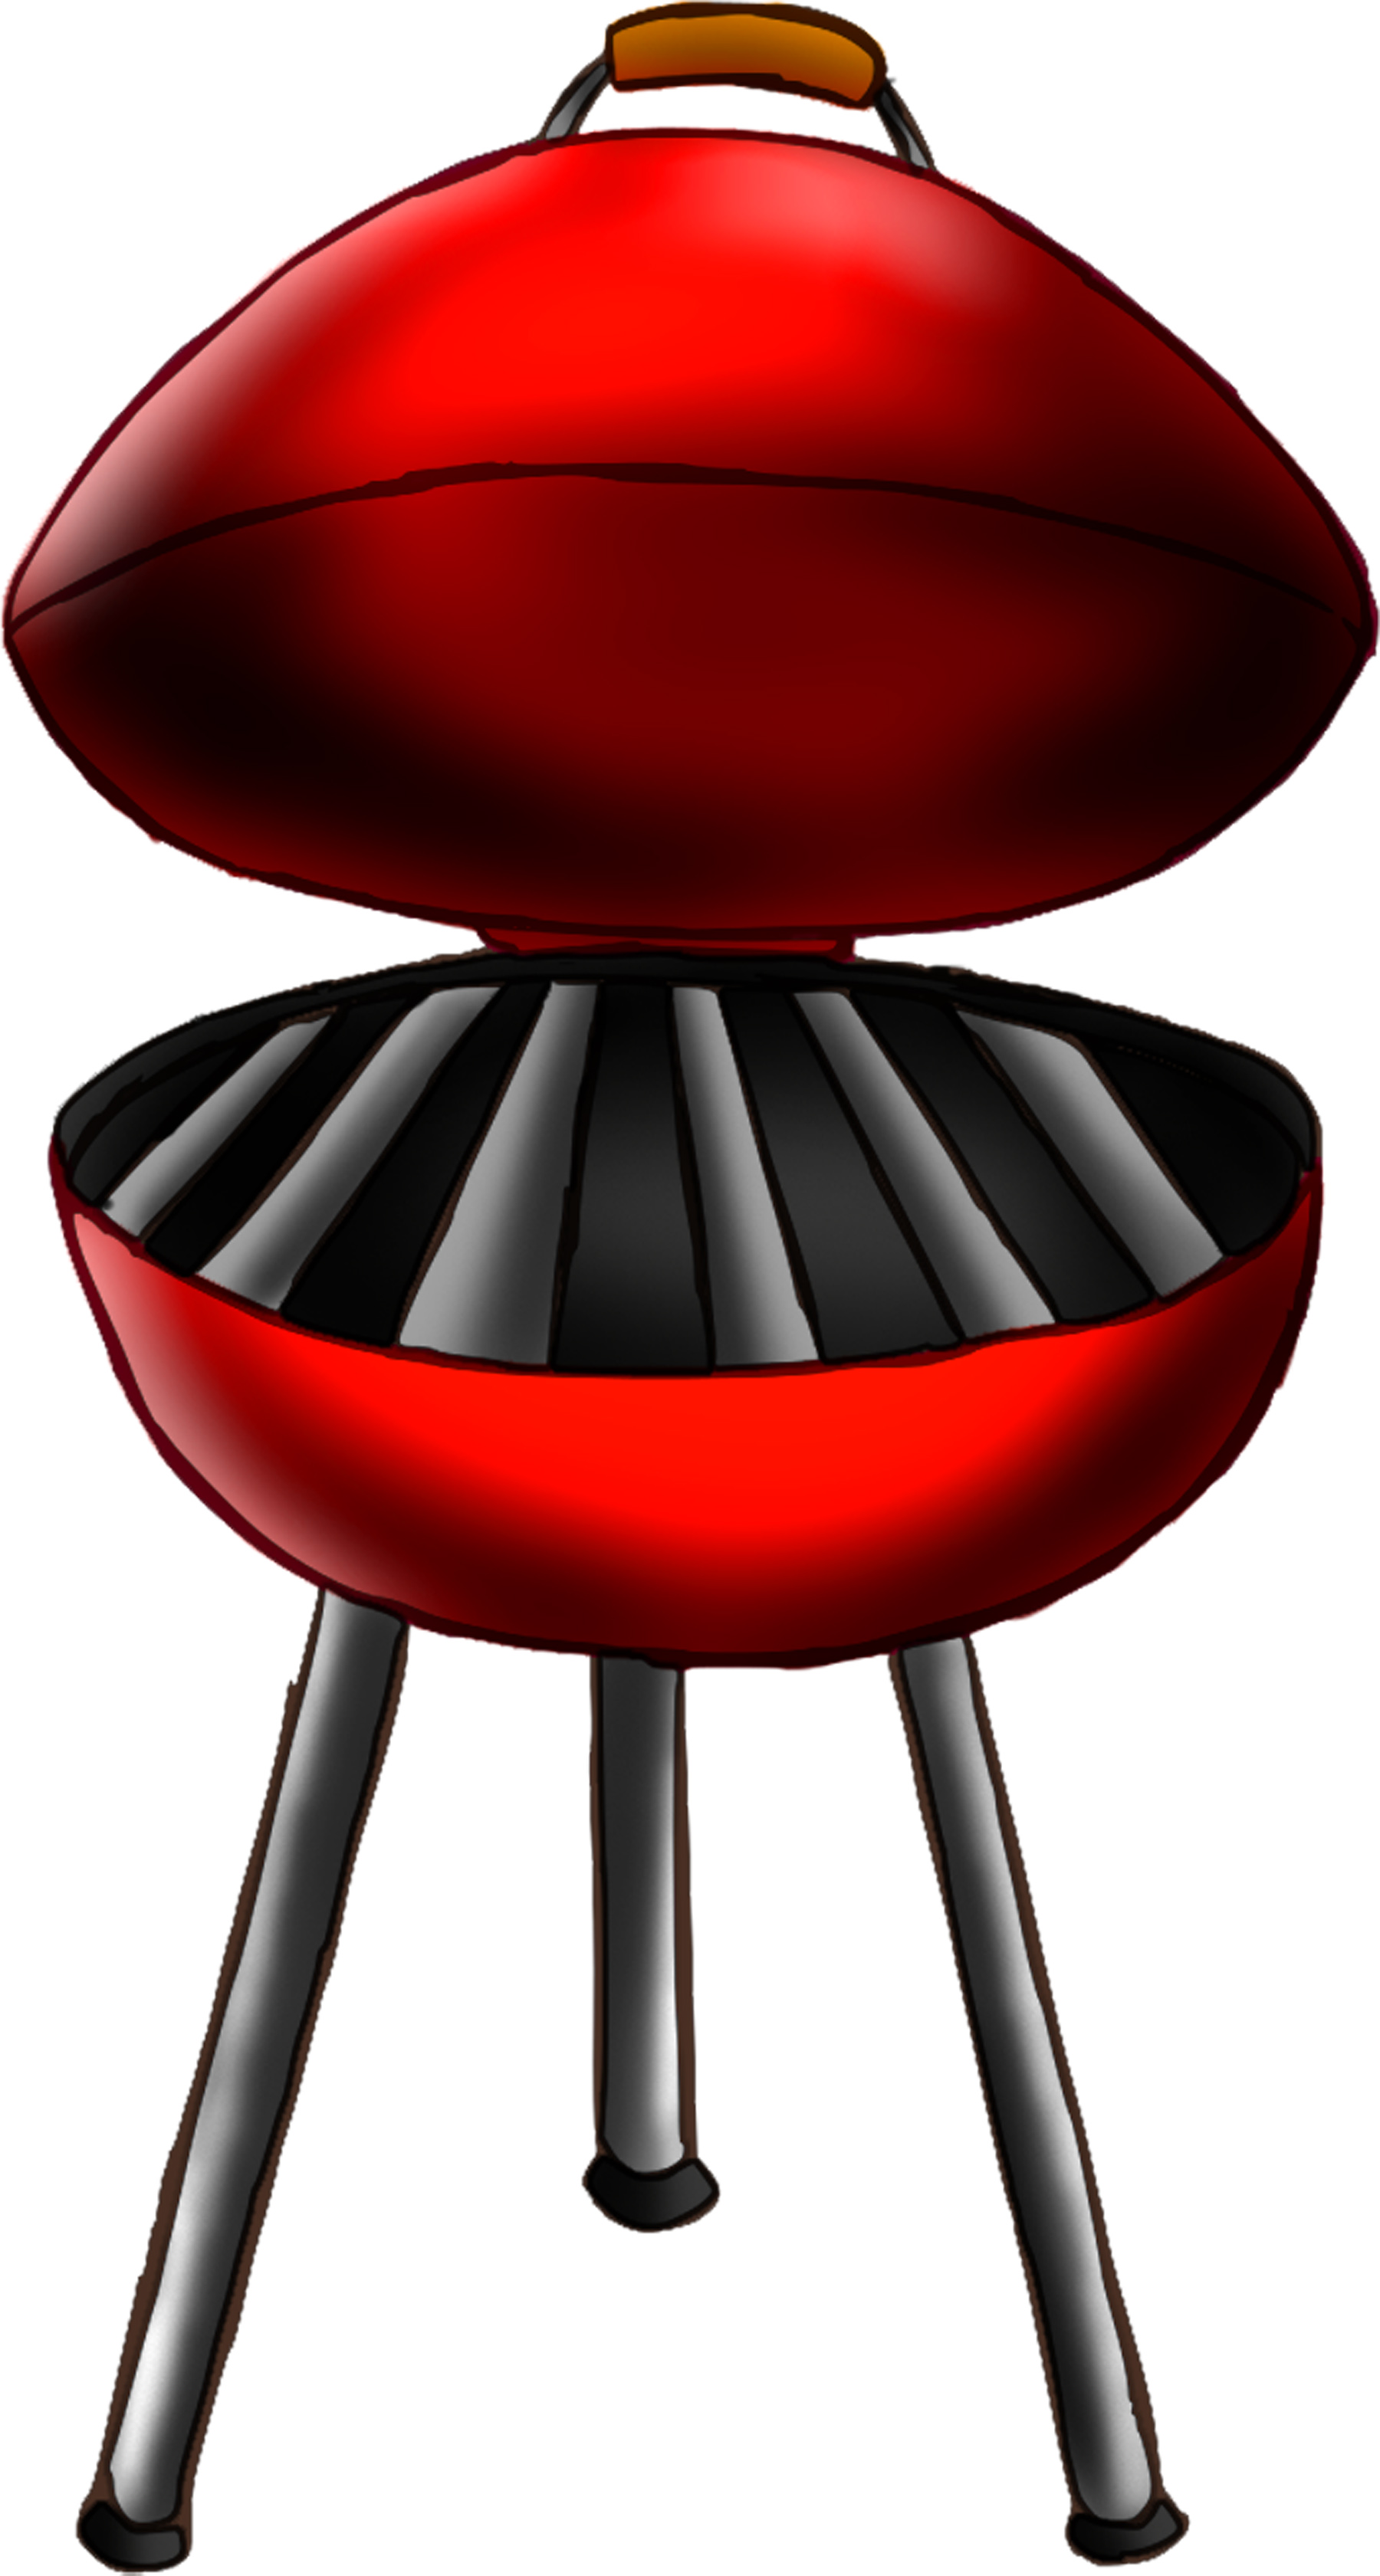 Bbq Png Image Clipart